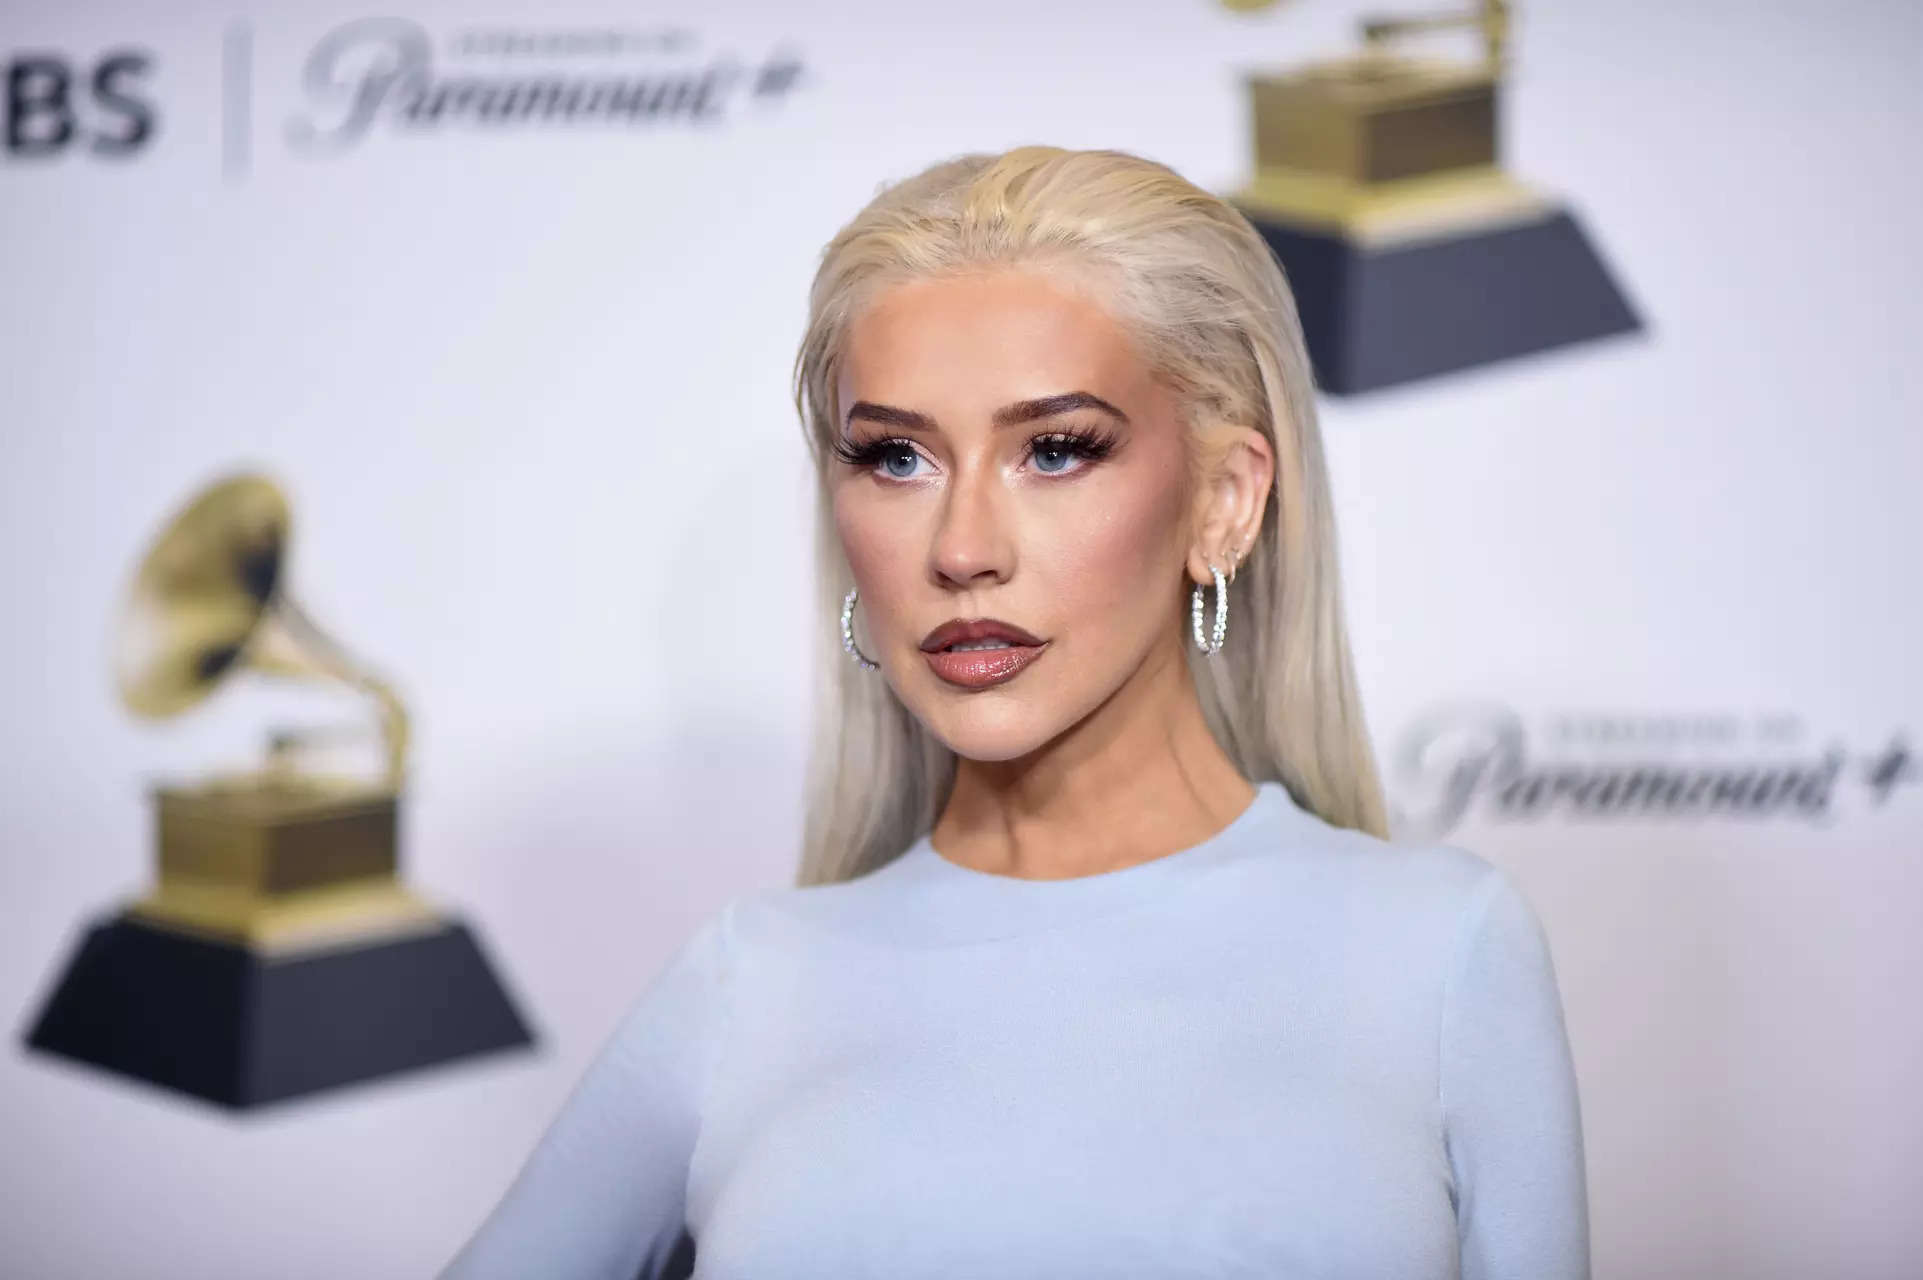 Guests invited by Christina Aguilera to join her for an Airbnb stay in Las Vegas 